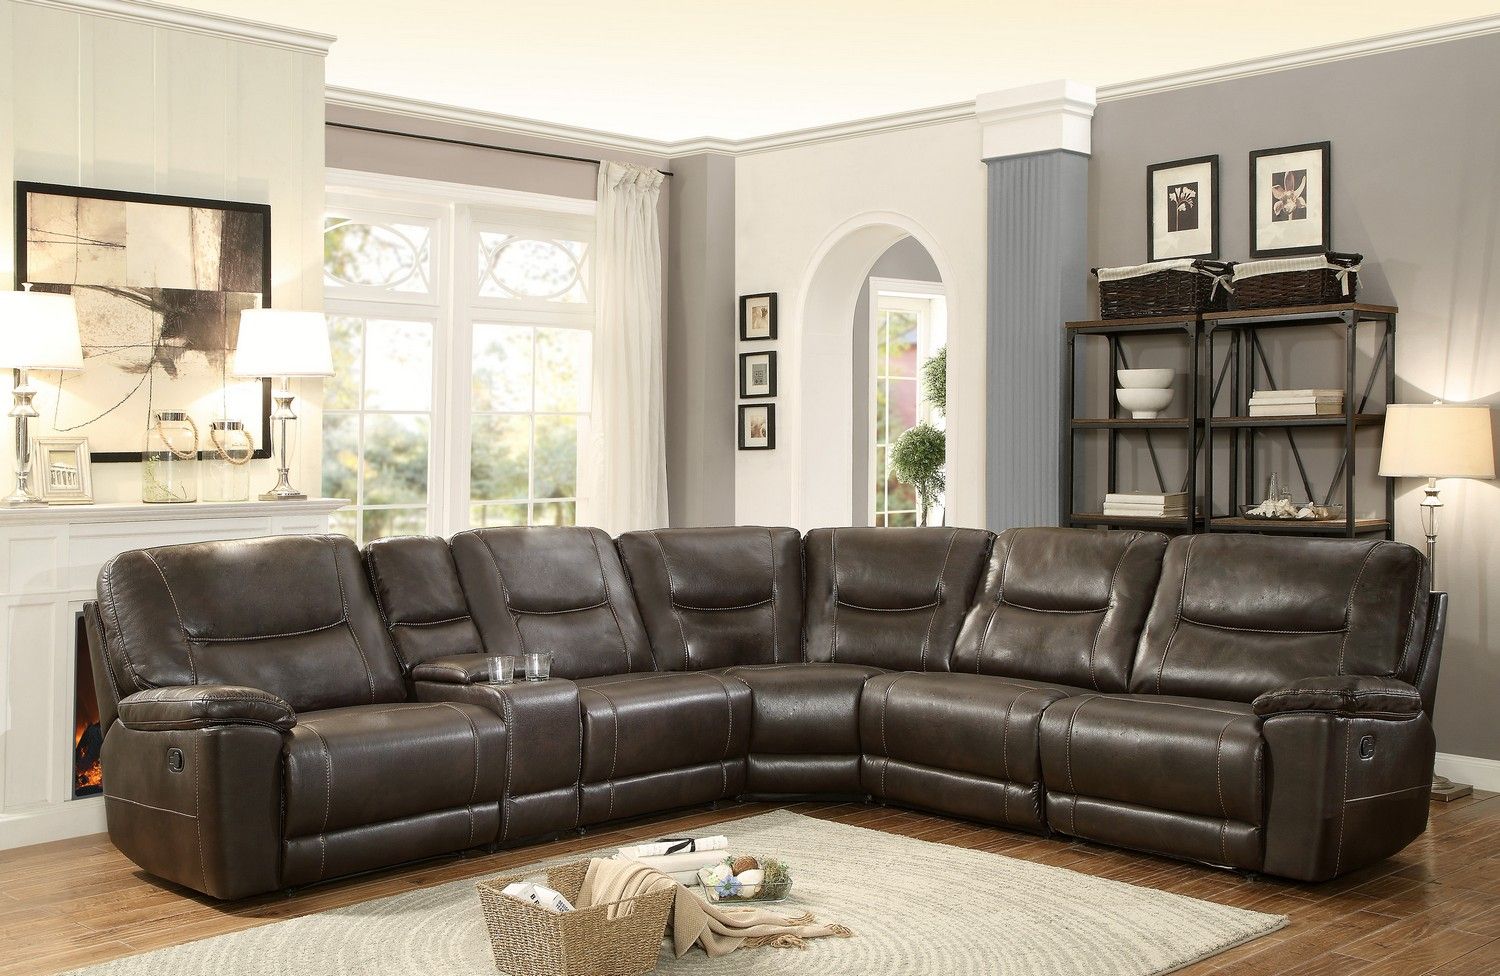 Homelegance Columbus Reclining Sectional Sofa Set D – Breathable Faux  Leather – Dark Brown 8490 Sectional Set D | Homelegance  Elegancefurnituredirect Intended For Faux Leather Sectional Sofa Sets (View 12 of 15)